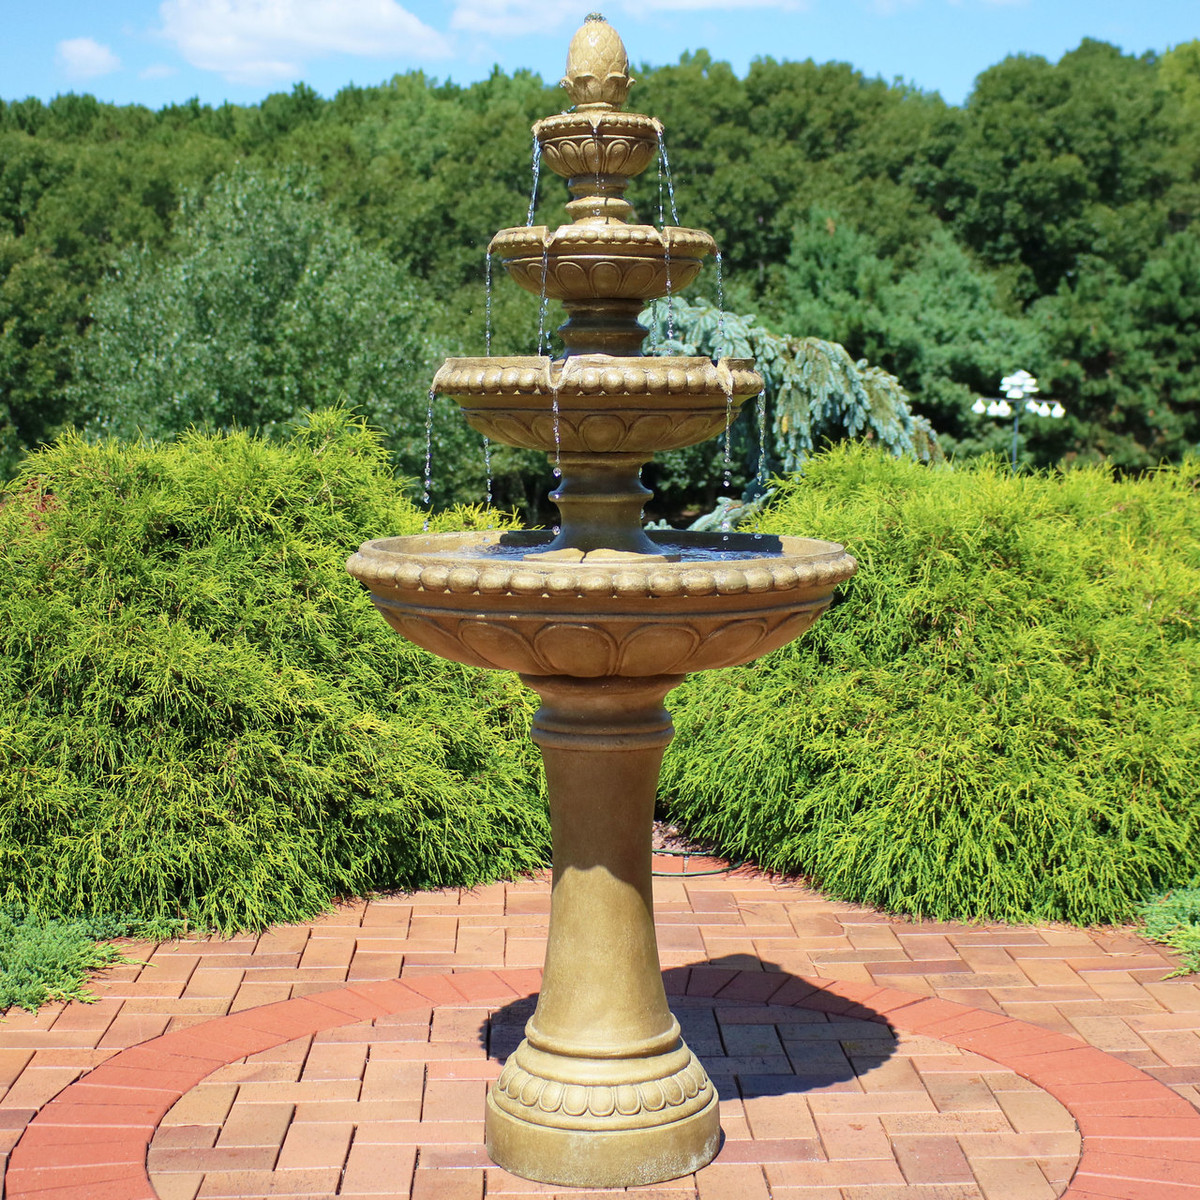 Sunnydaze 4Tier Eggshell Outdoor Water Fountain, 65 Inch Tall, Perfect